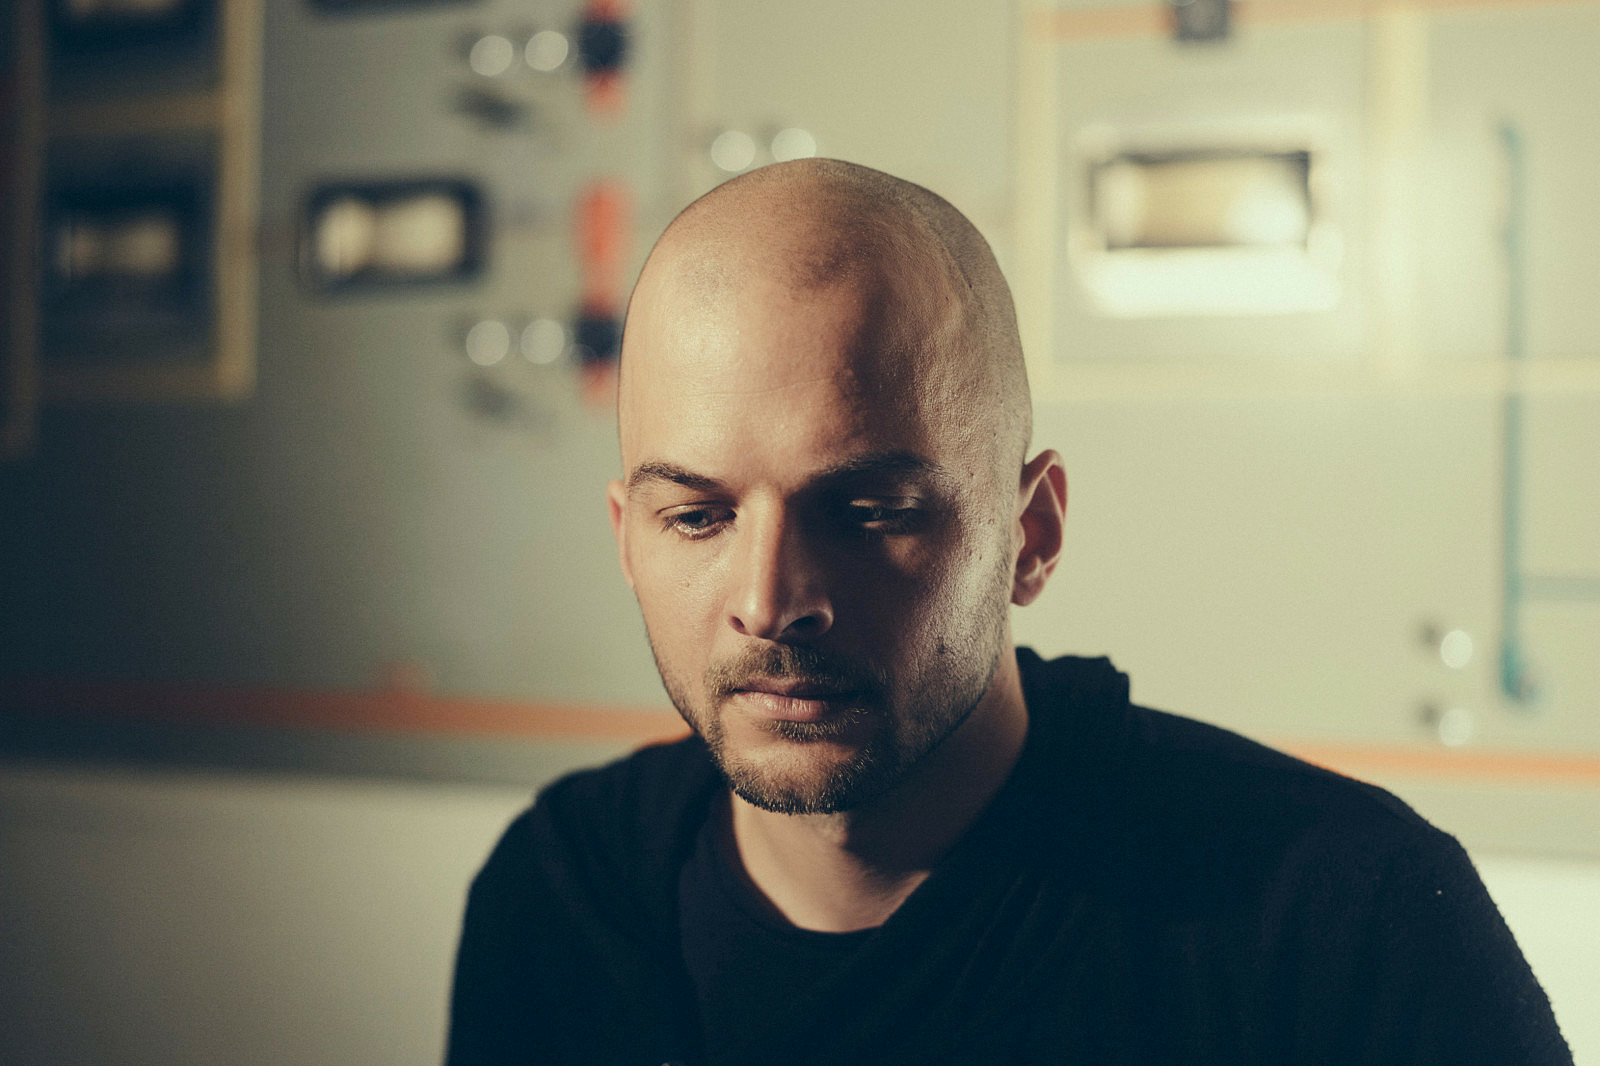 Nils Frahm on making music that lasts